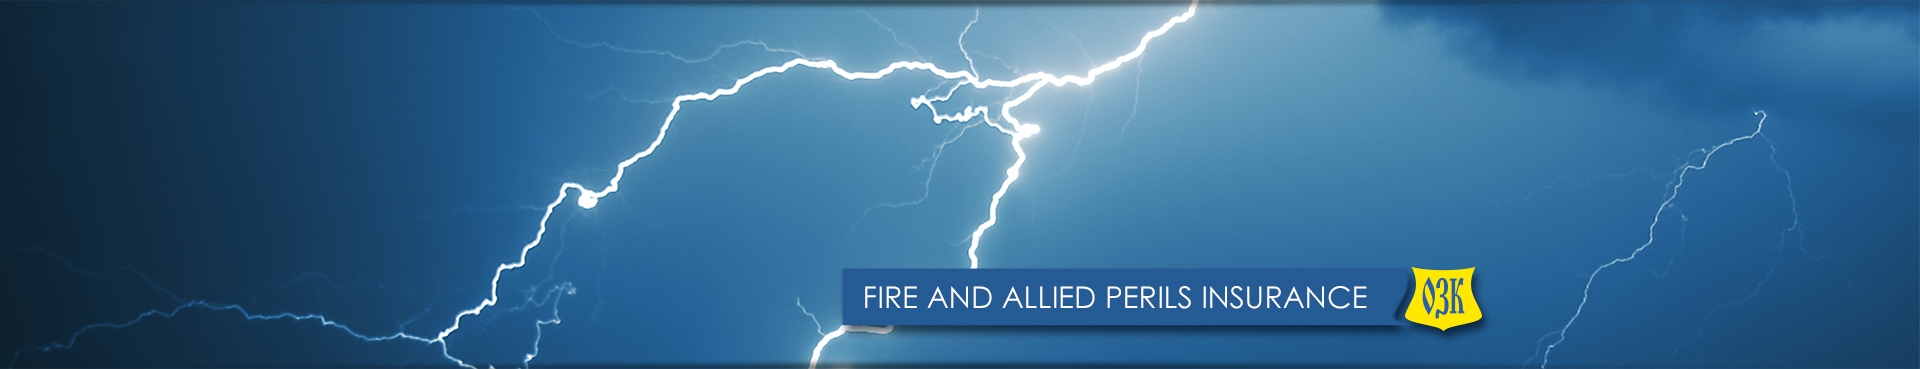 FIRE AND ALLIED PERILS INSURANCE